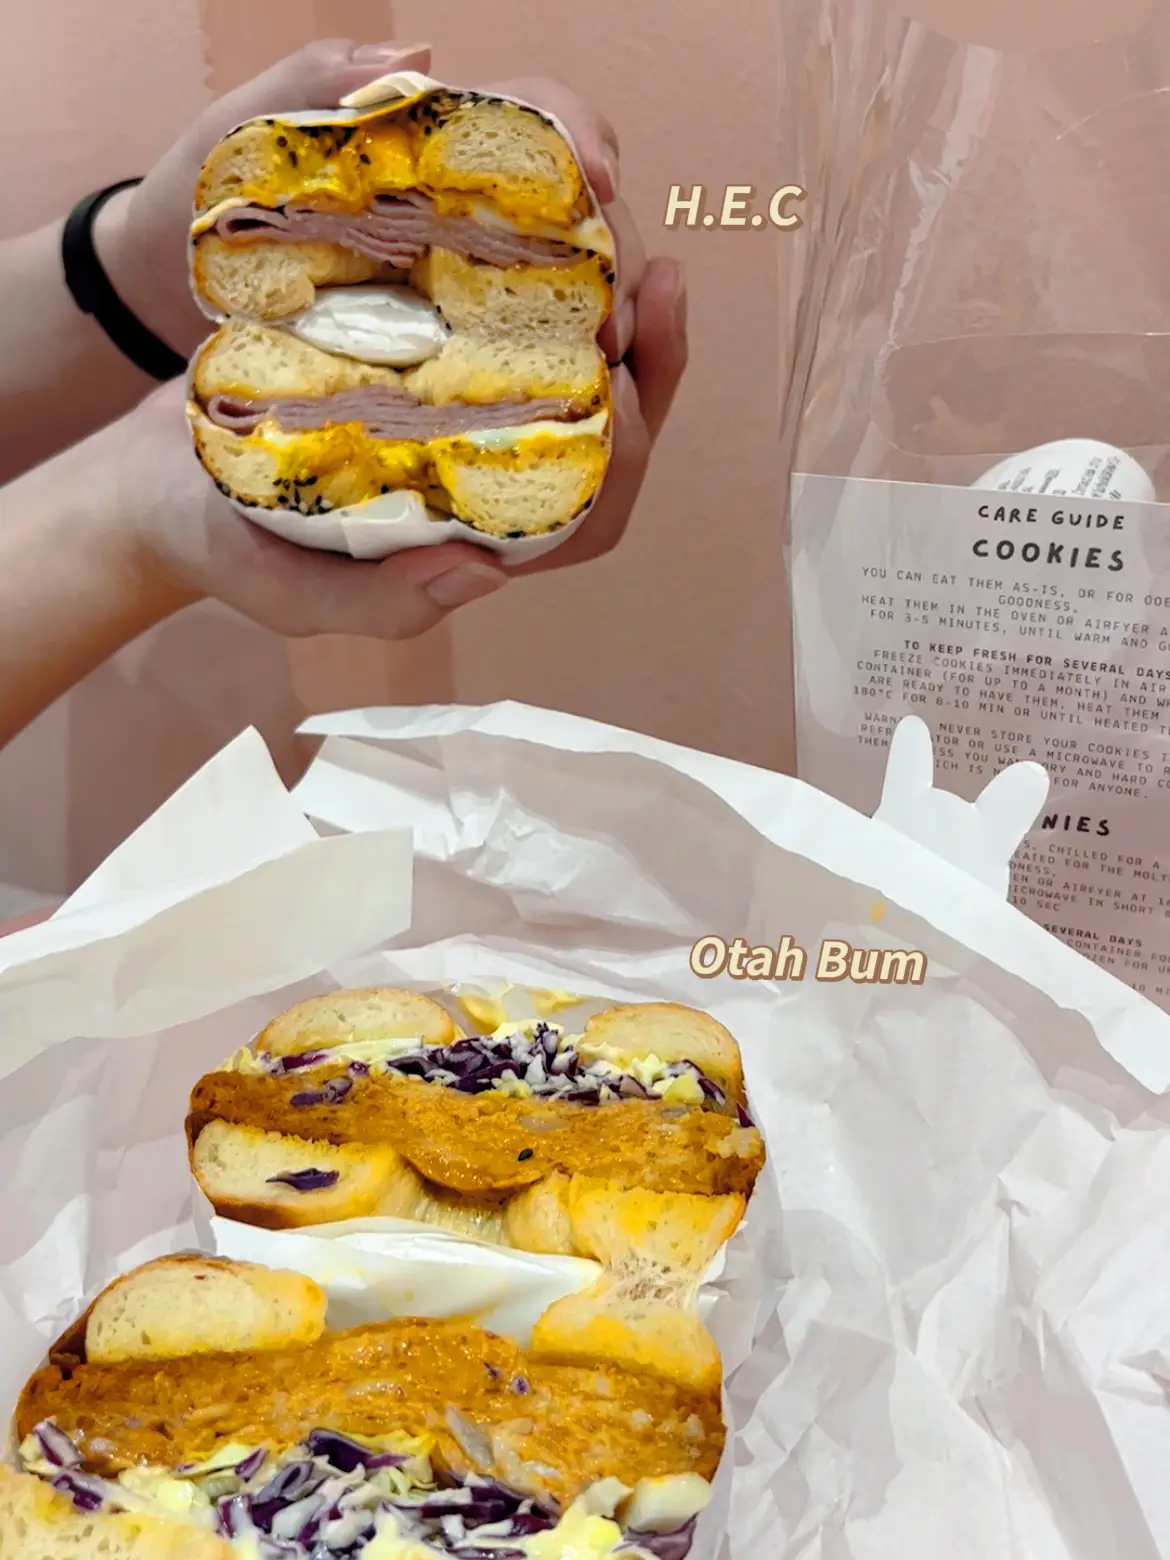 IG FAMOUS BAKERY | Yummy Loaded Bagels 💗✨'s images(1)